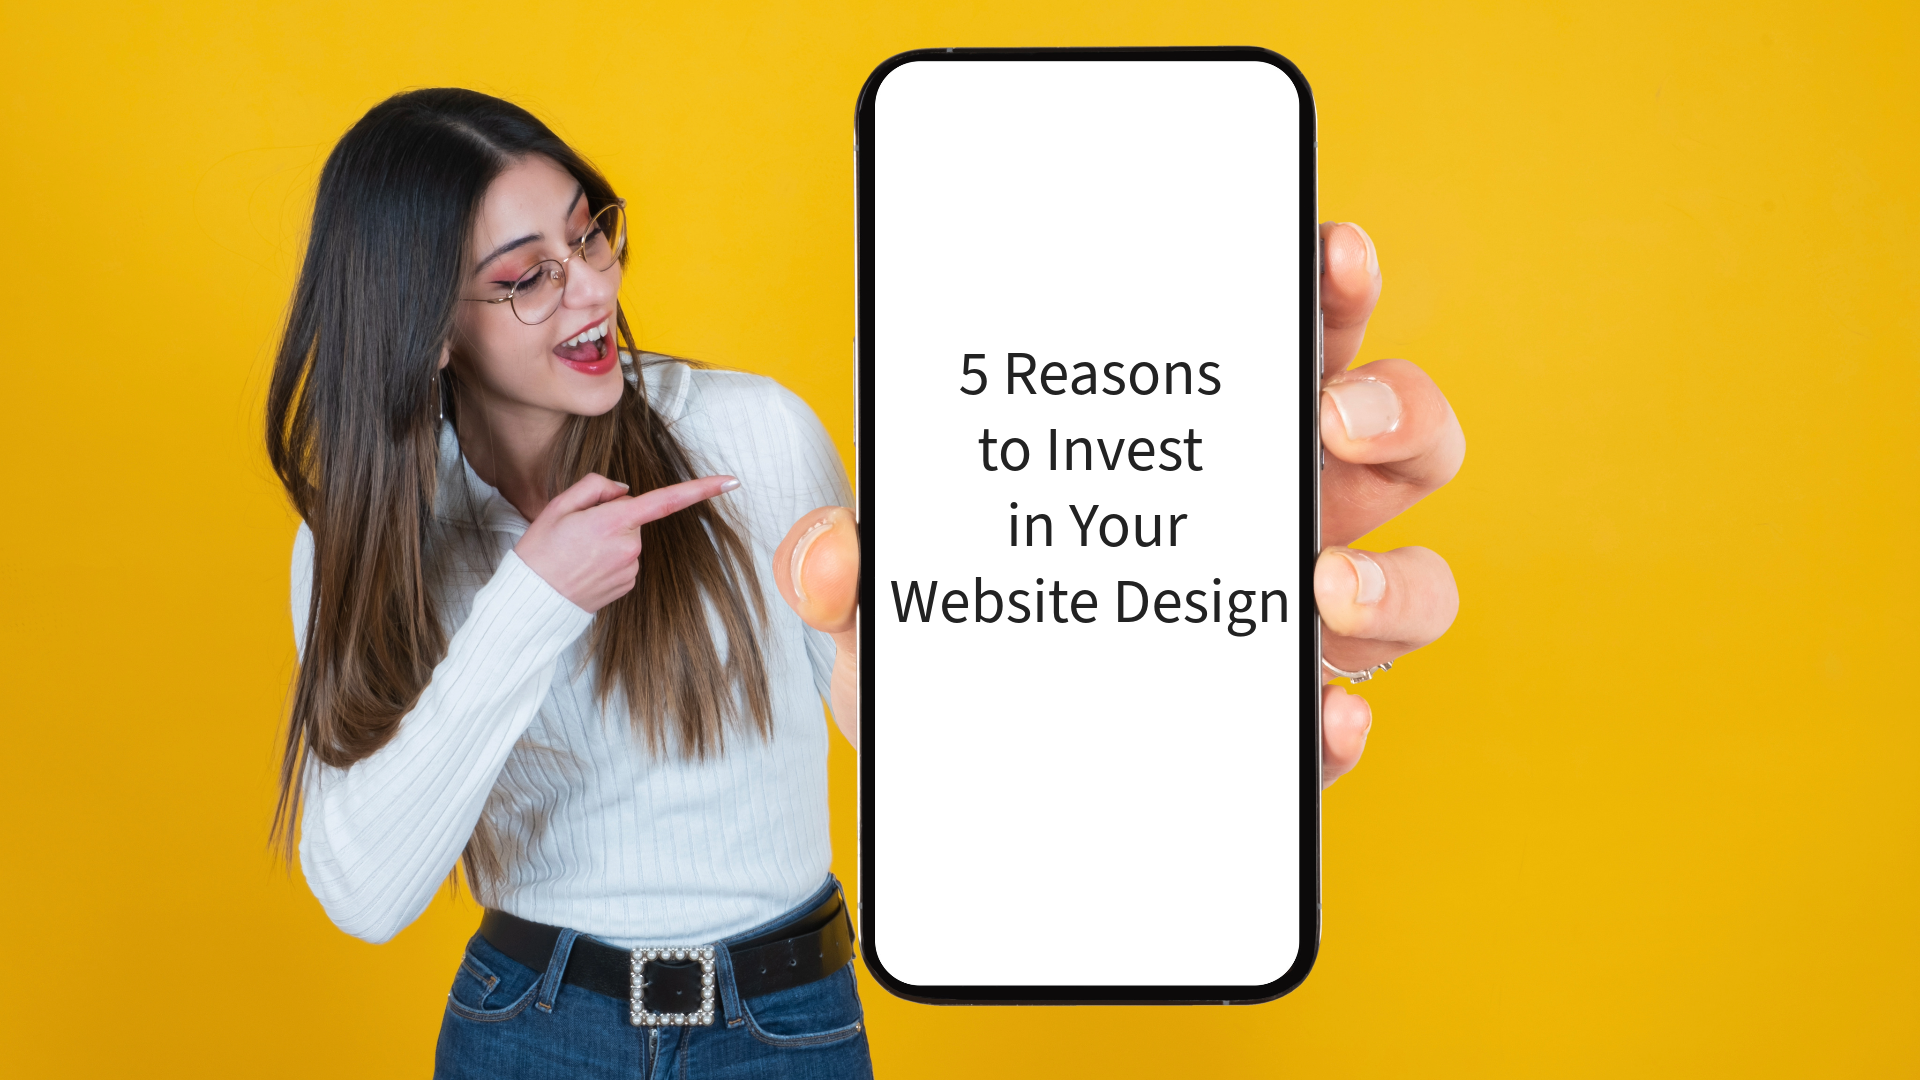 A woman holds a cell phone in her hand. On the screen it says "5 Reasons to Invest in Your Website Design"